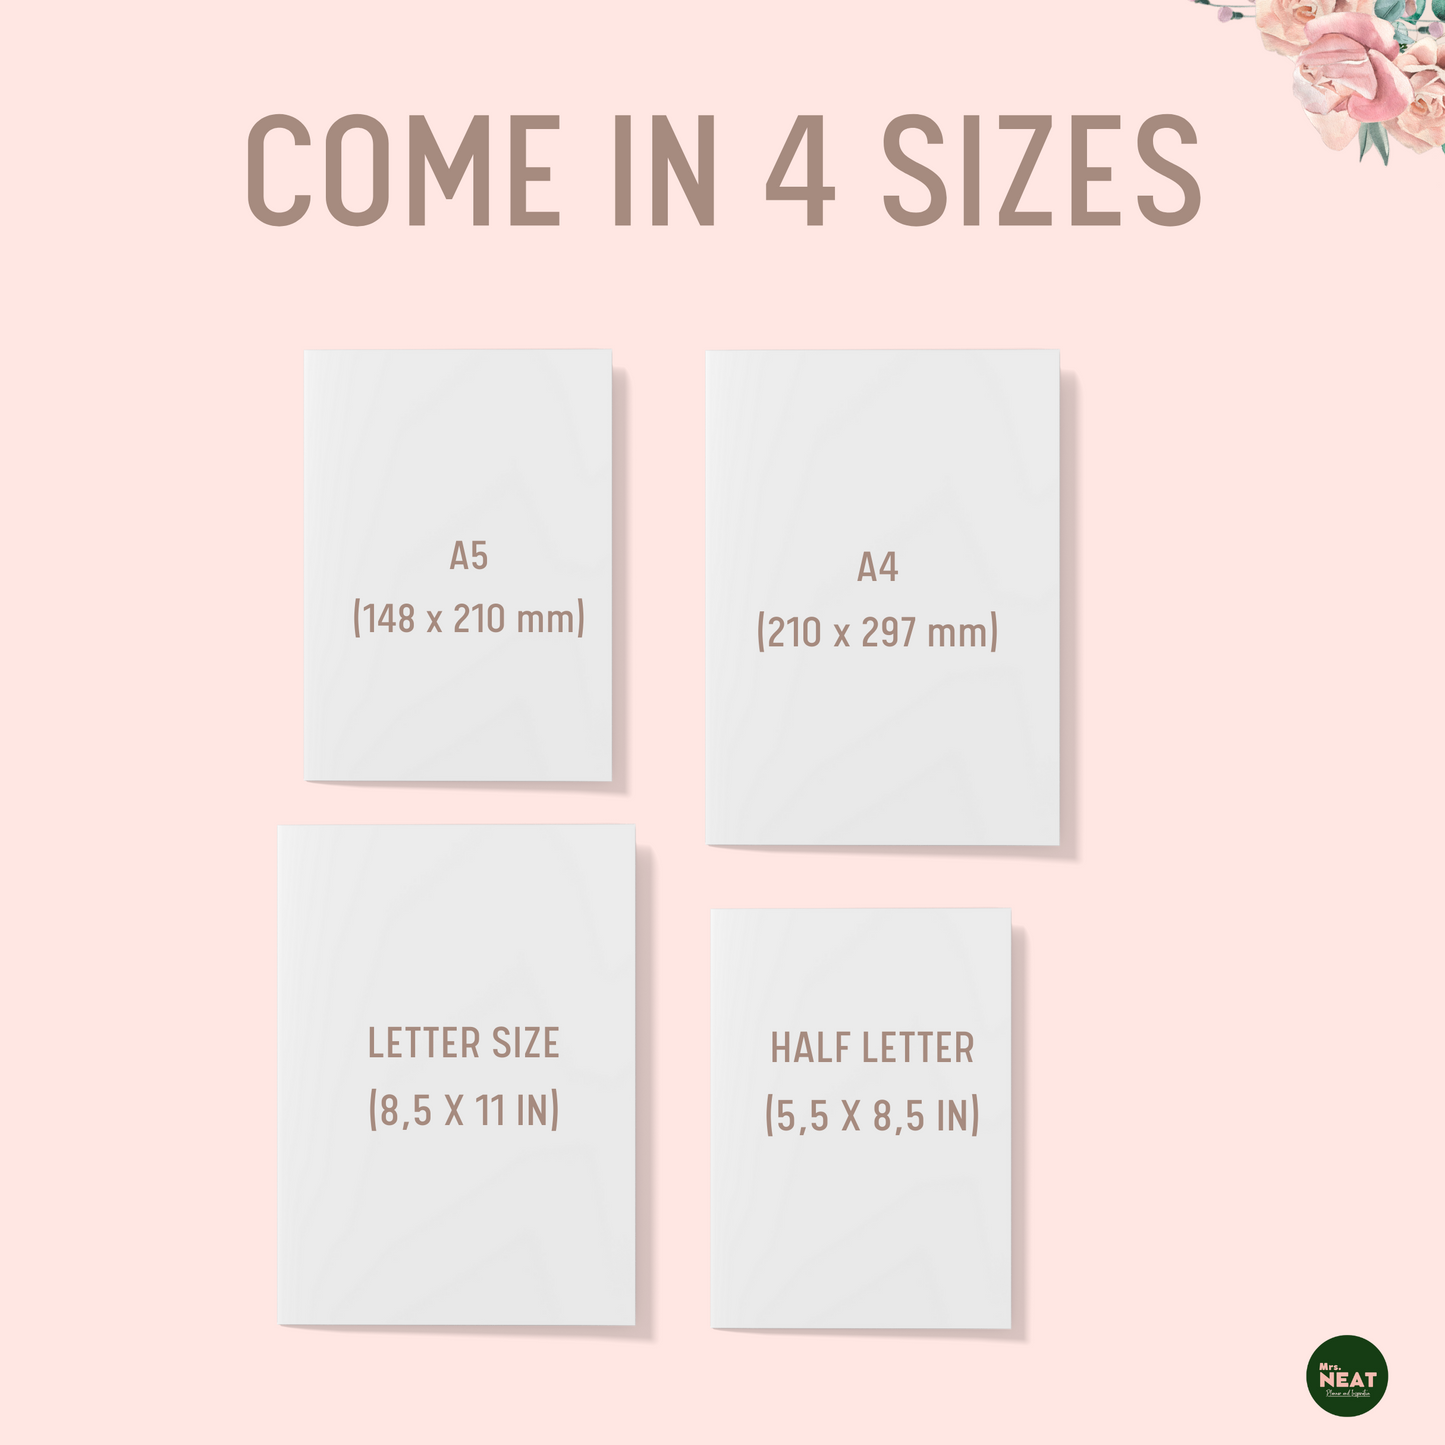 Floral Credit Tracker Planner come in A5 size, A4, Letter & Half Letter size